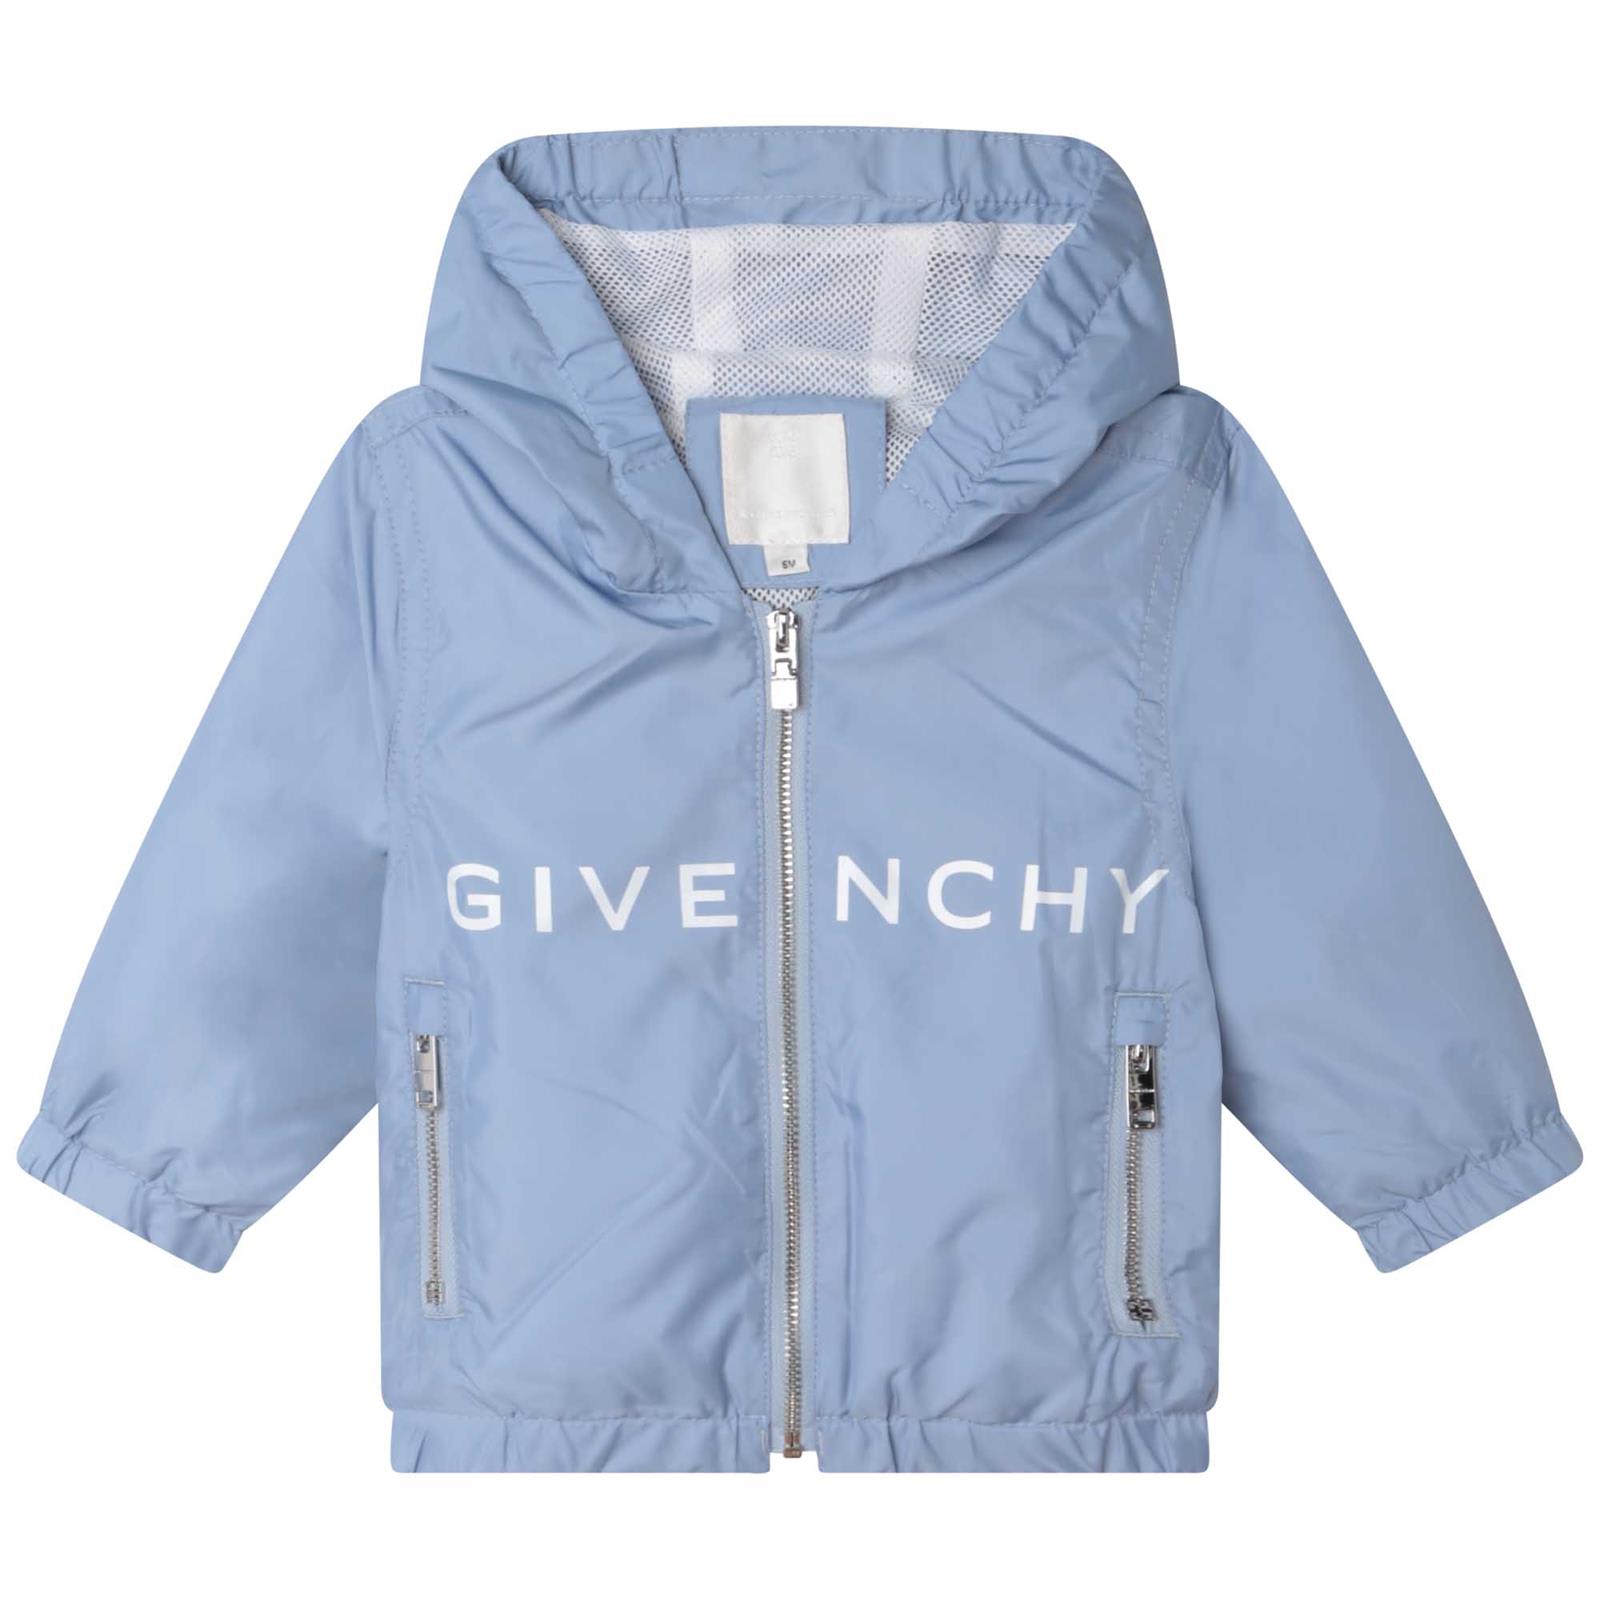 Givenchy Sweatshirt With Zip And Printed Logo